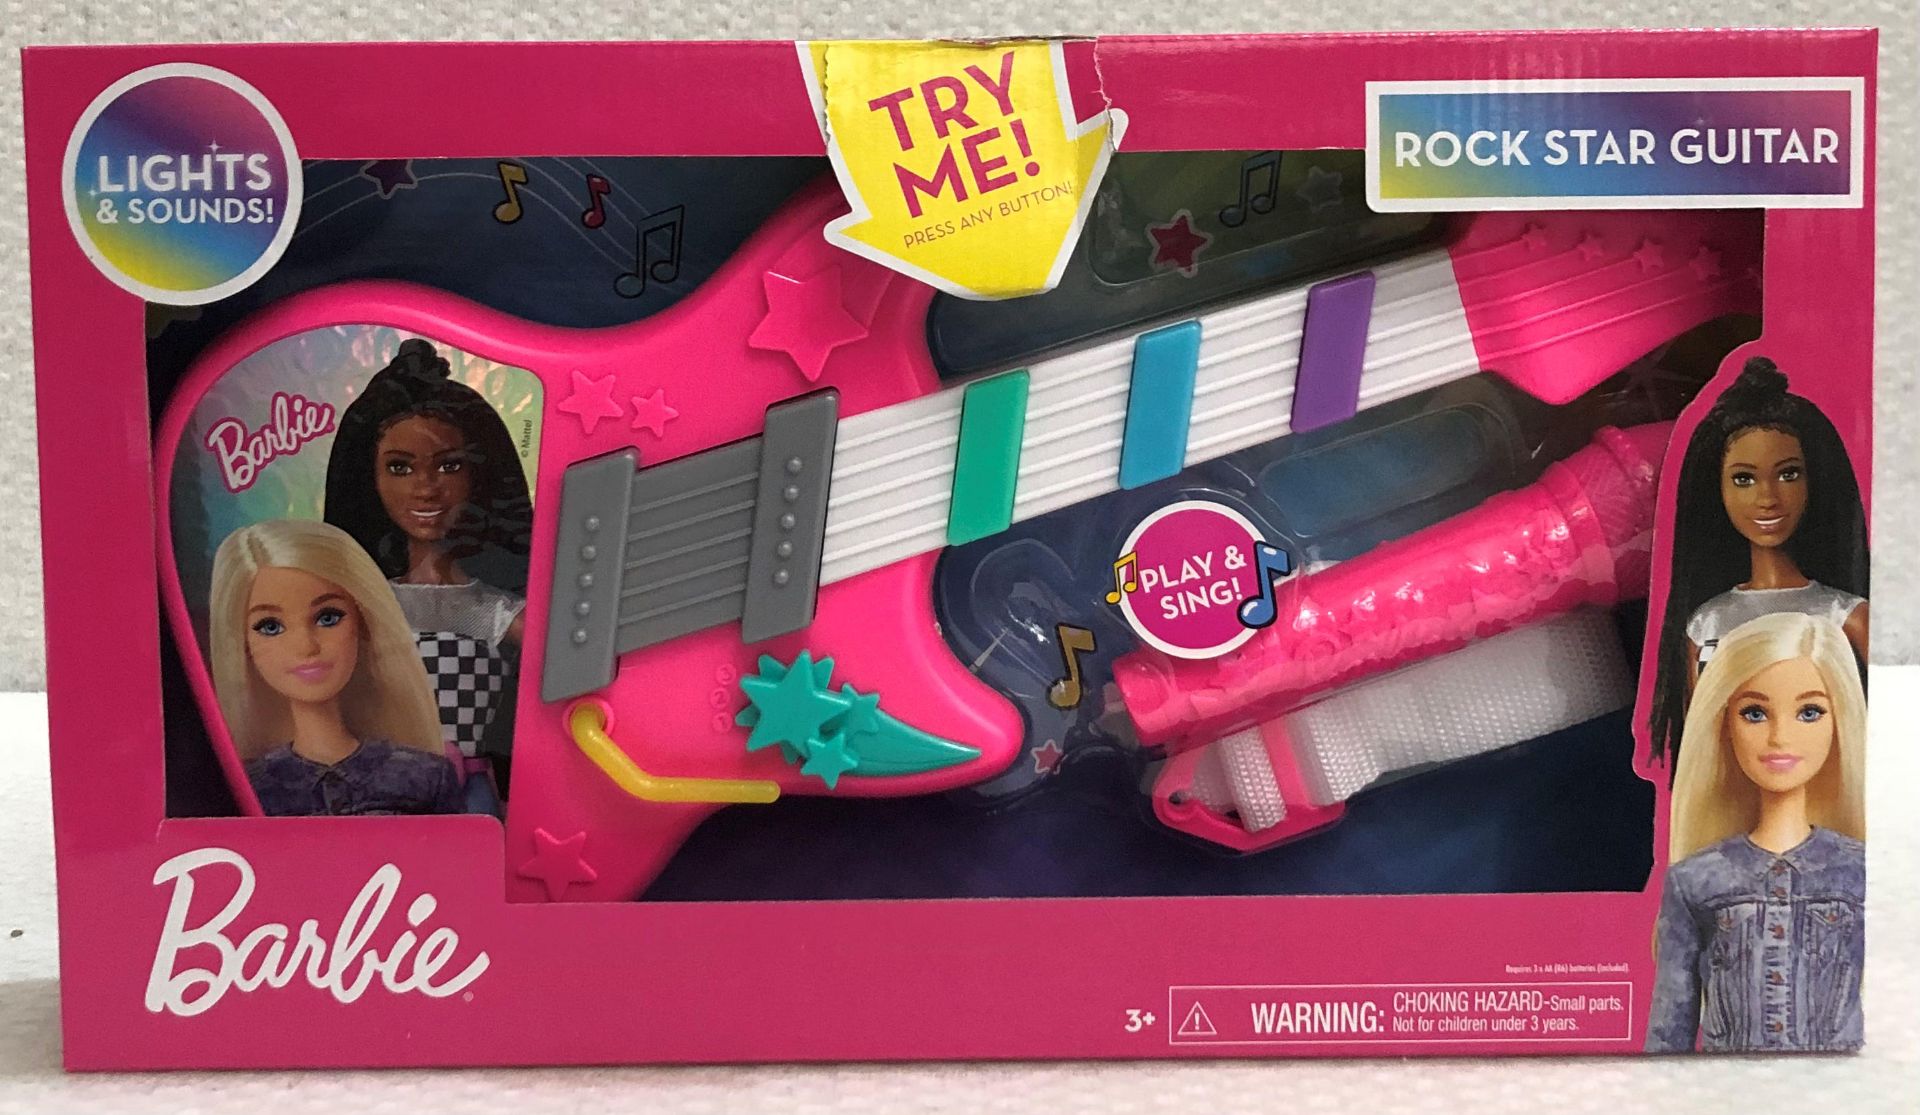 1 x Barbie Rock Star Guitar - New/Boxed - HTYS306 - CL987 - Location: Altrincham WA14 - RRP: £ - Image 2 of 6